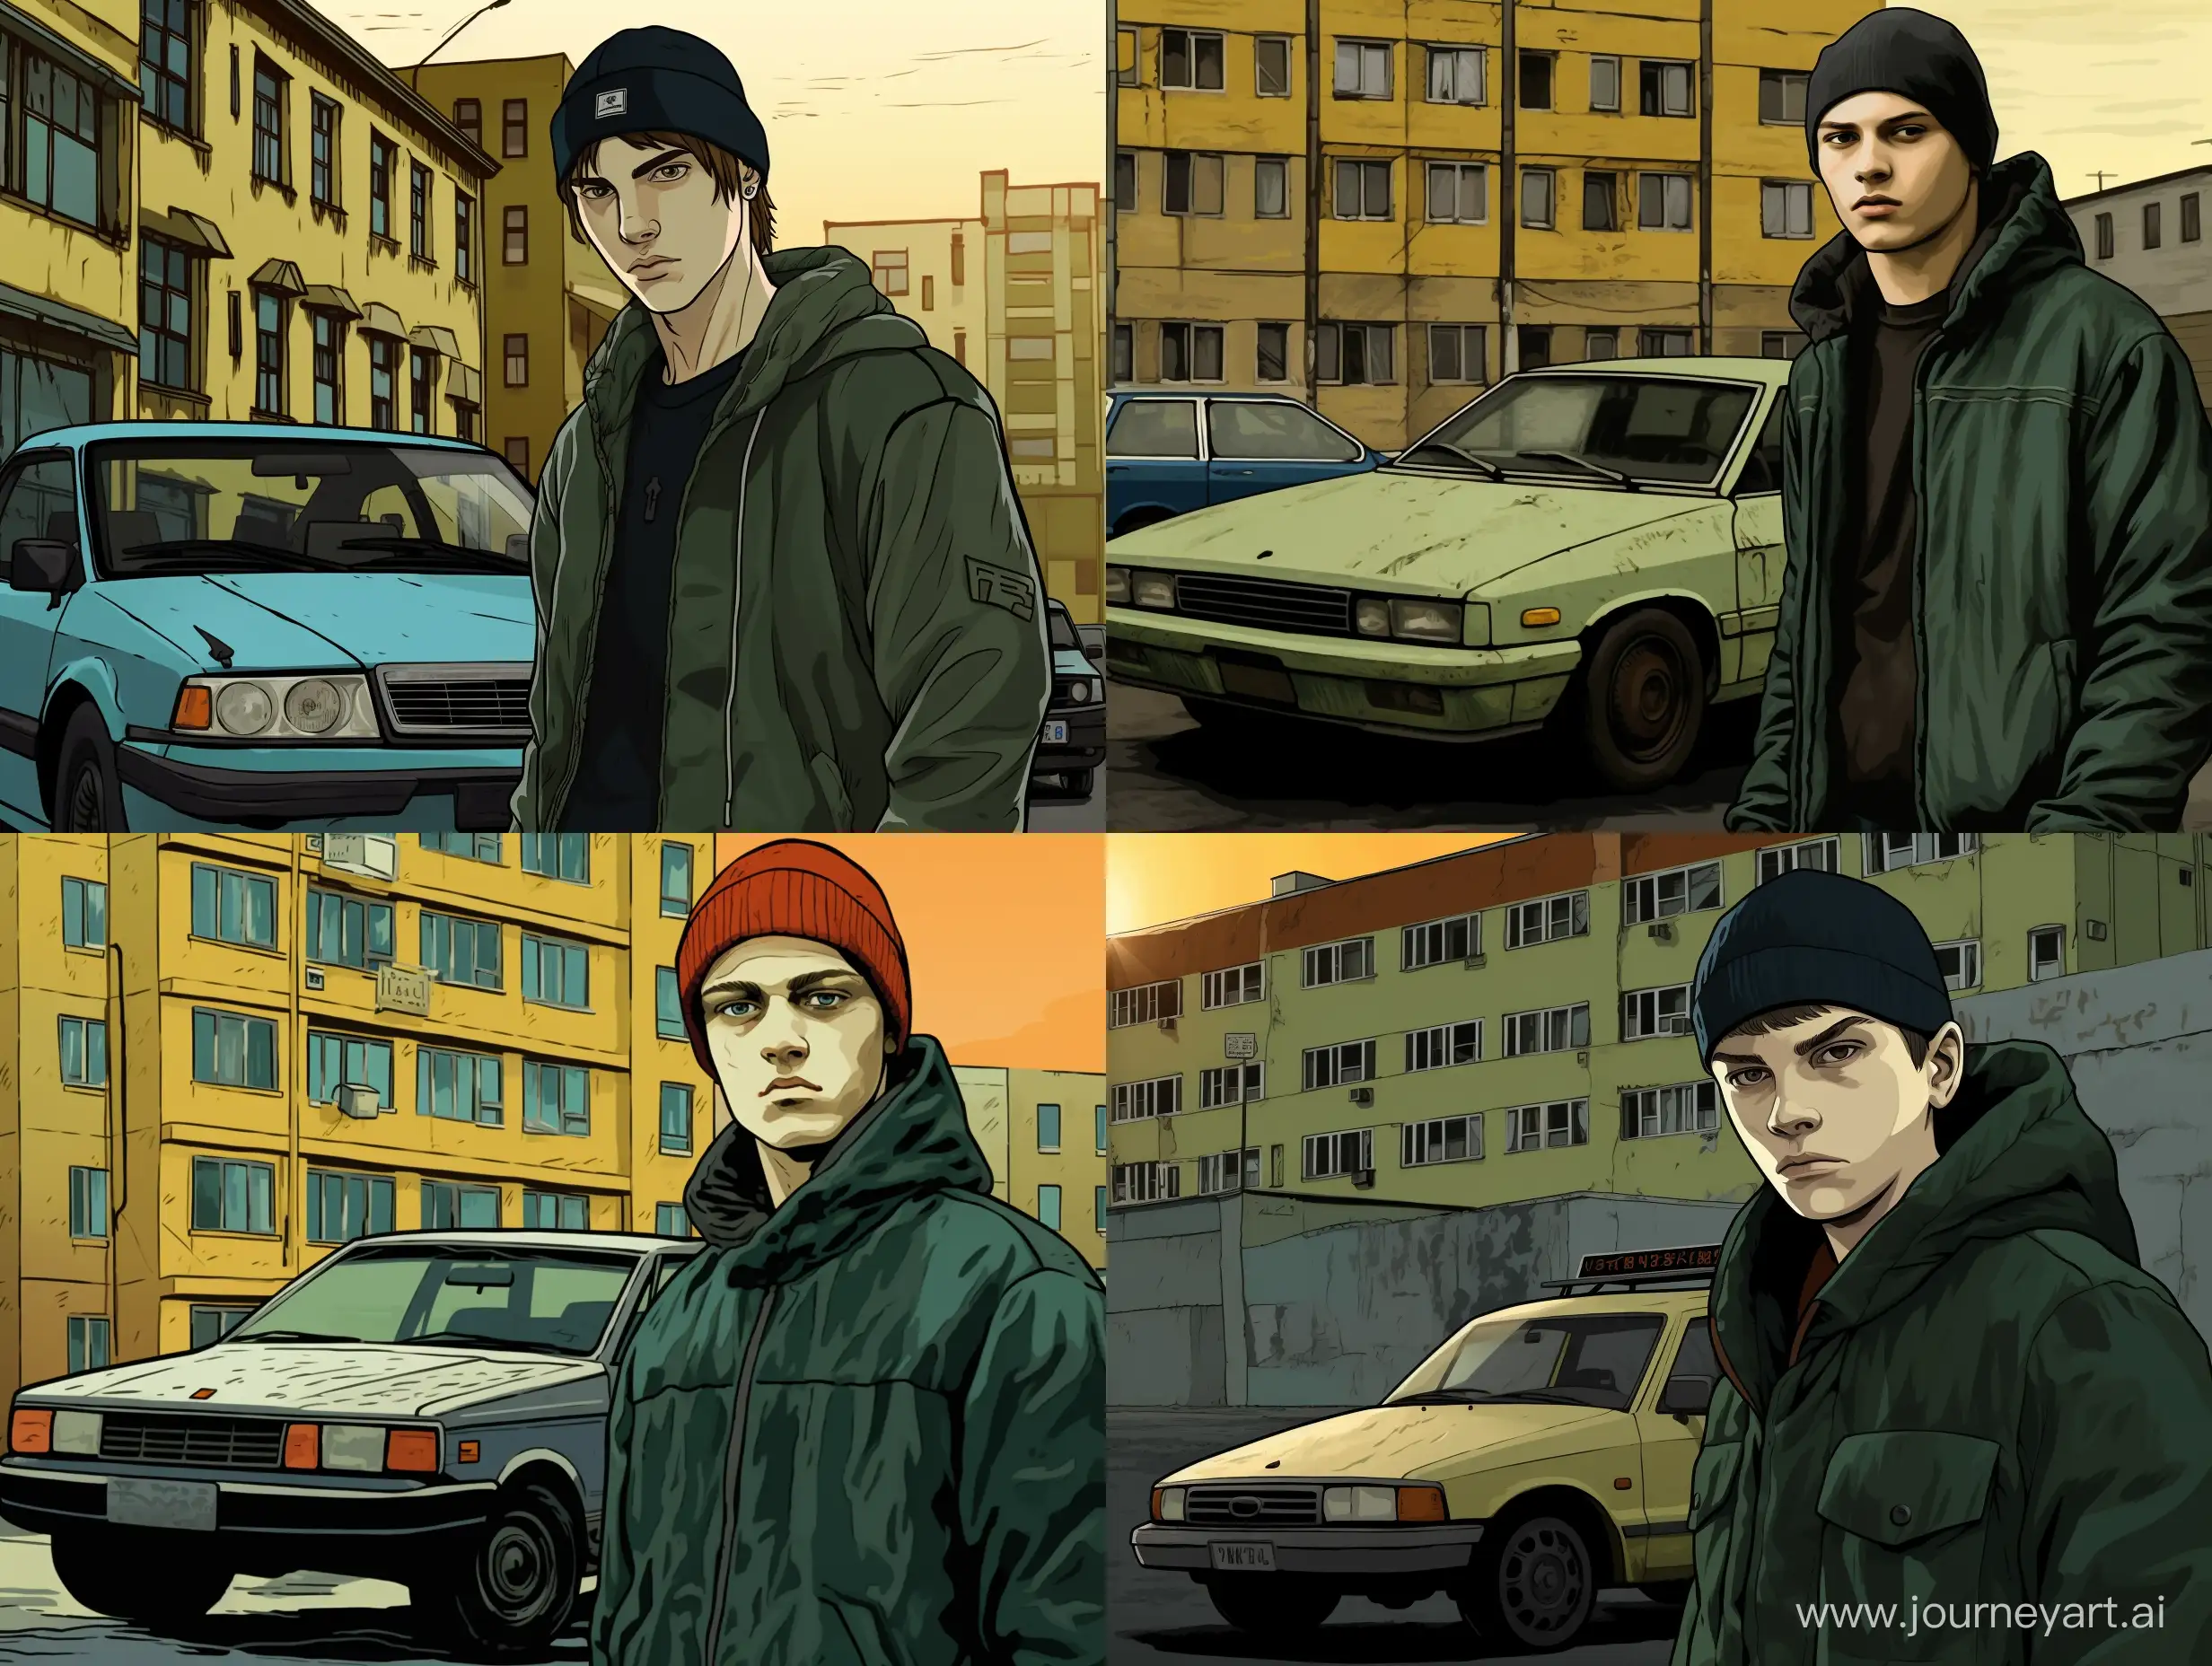 A fat teenager weared in green hoodie is standing next to an old 2003 used liftback sedan in a black-green colour. The yellow halogen headlights of this sedan shine brightly. The action takes place on a dark street in a eastern european city in prefab dirty post soviet 16 storey building